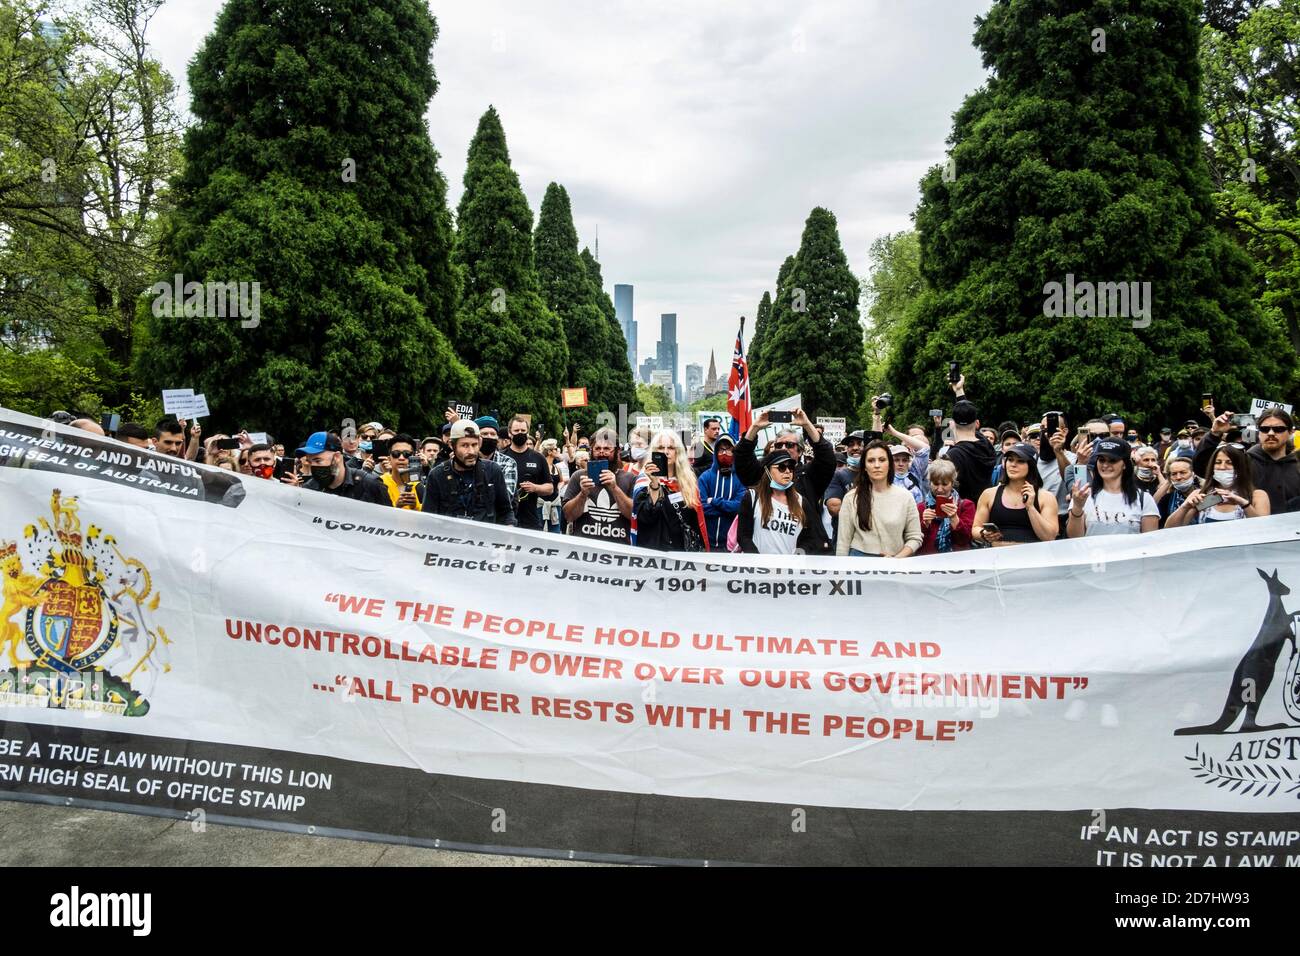 Melbourne, Australia. 23rd Oct, 2020. Protesters hold a banner at the Shrine of Remembrance during the demonstration.About 200 to 300 protesters gathered for Freedom Day rally in opposition to Covid19 restrictions. The protest started at Melbourne Shrine Remembrance were protesters held placards while chanting slogans against the Premier Daniel Andrews tough restrictions due to Covid 19. Credit: SOPA Images Limited/Alamy Live News Stock Photo